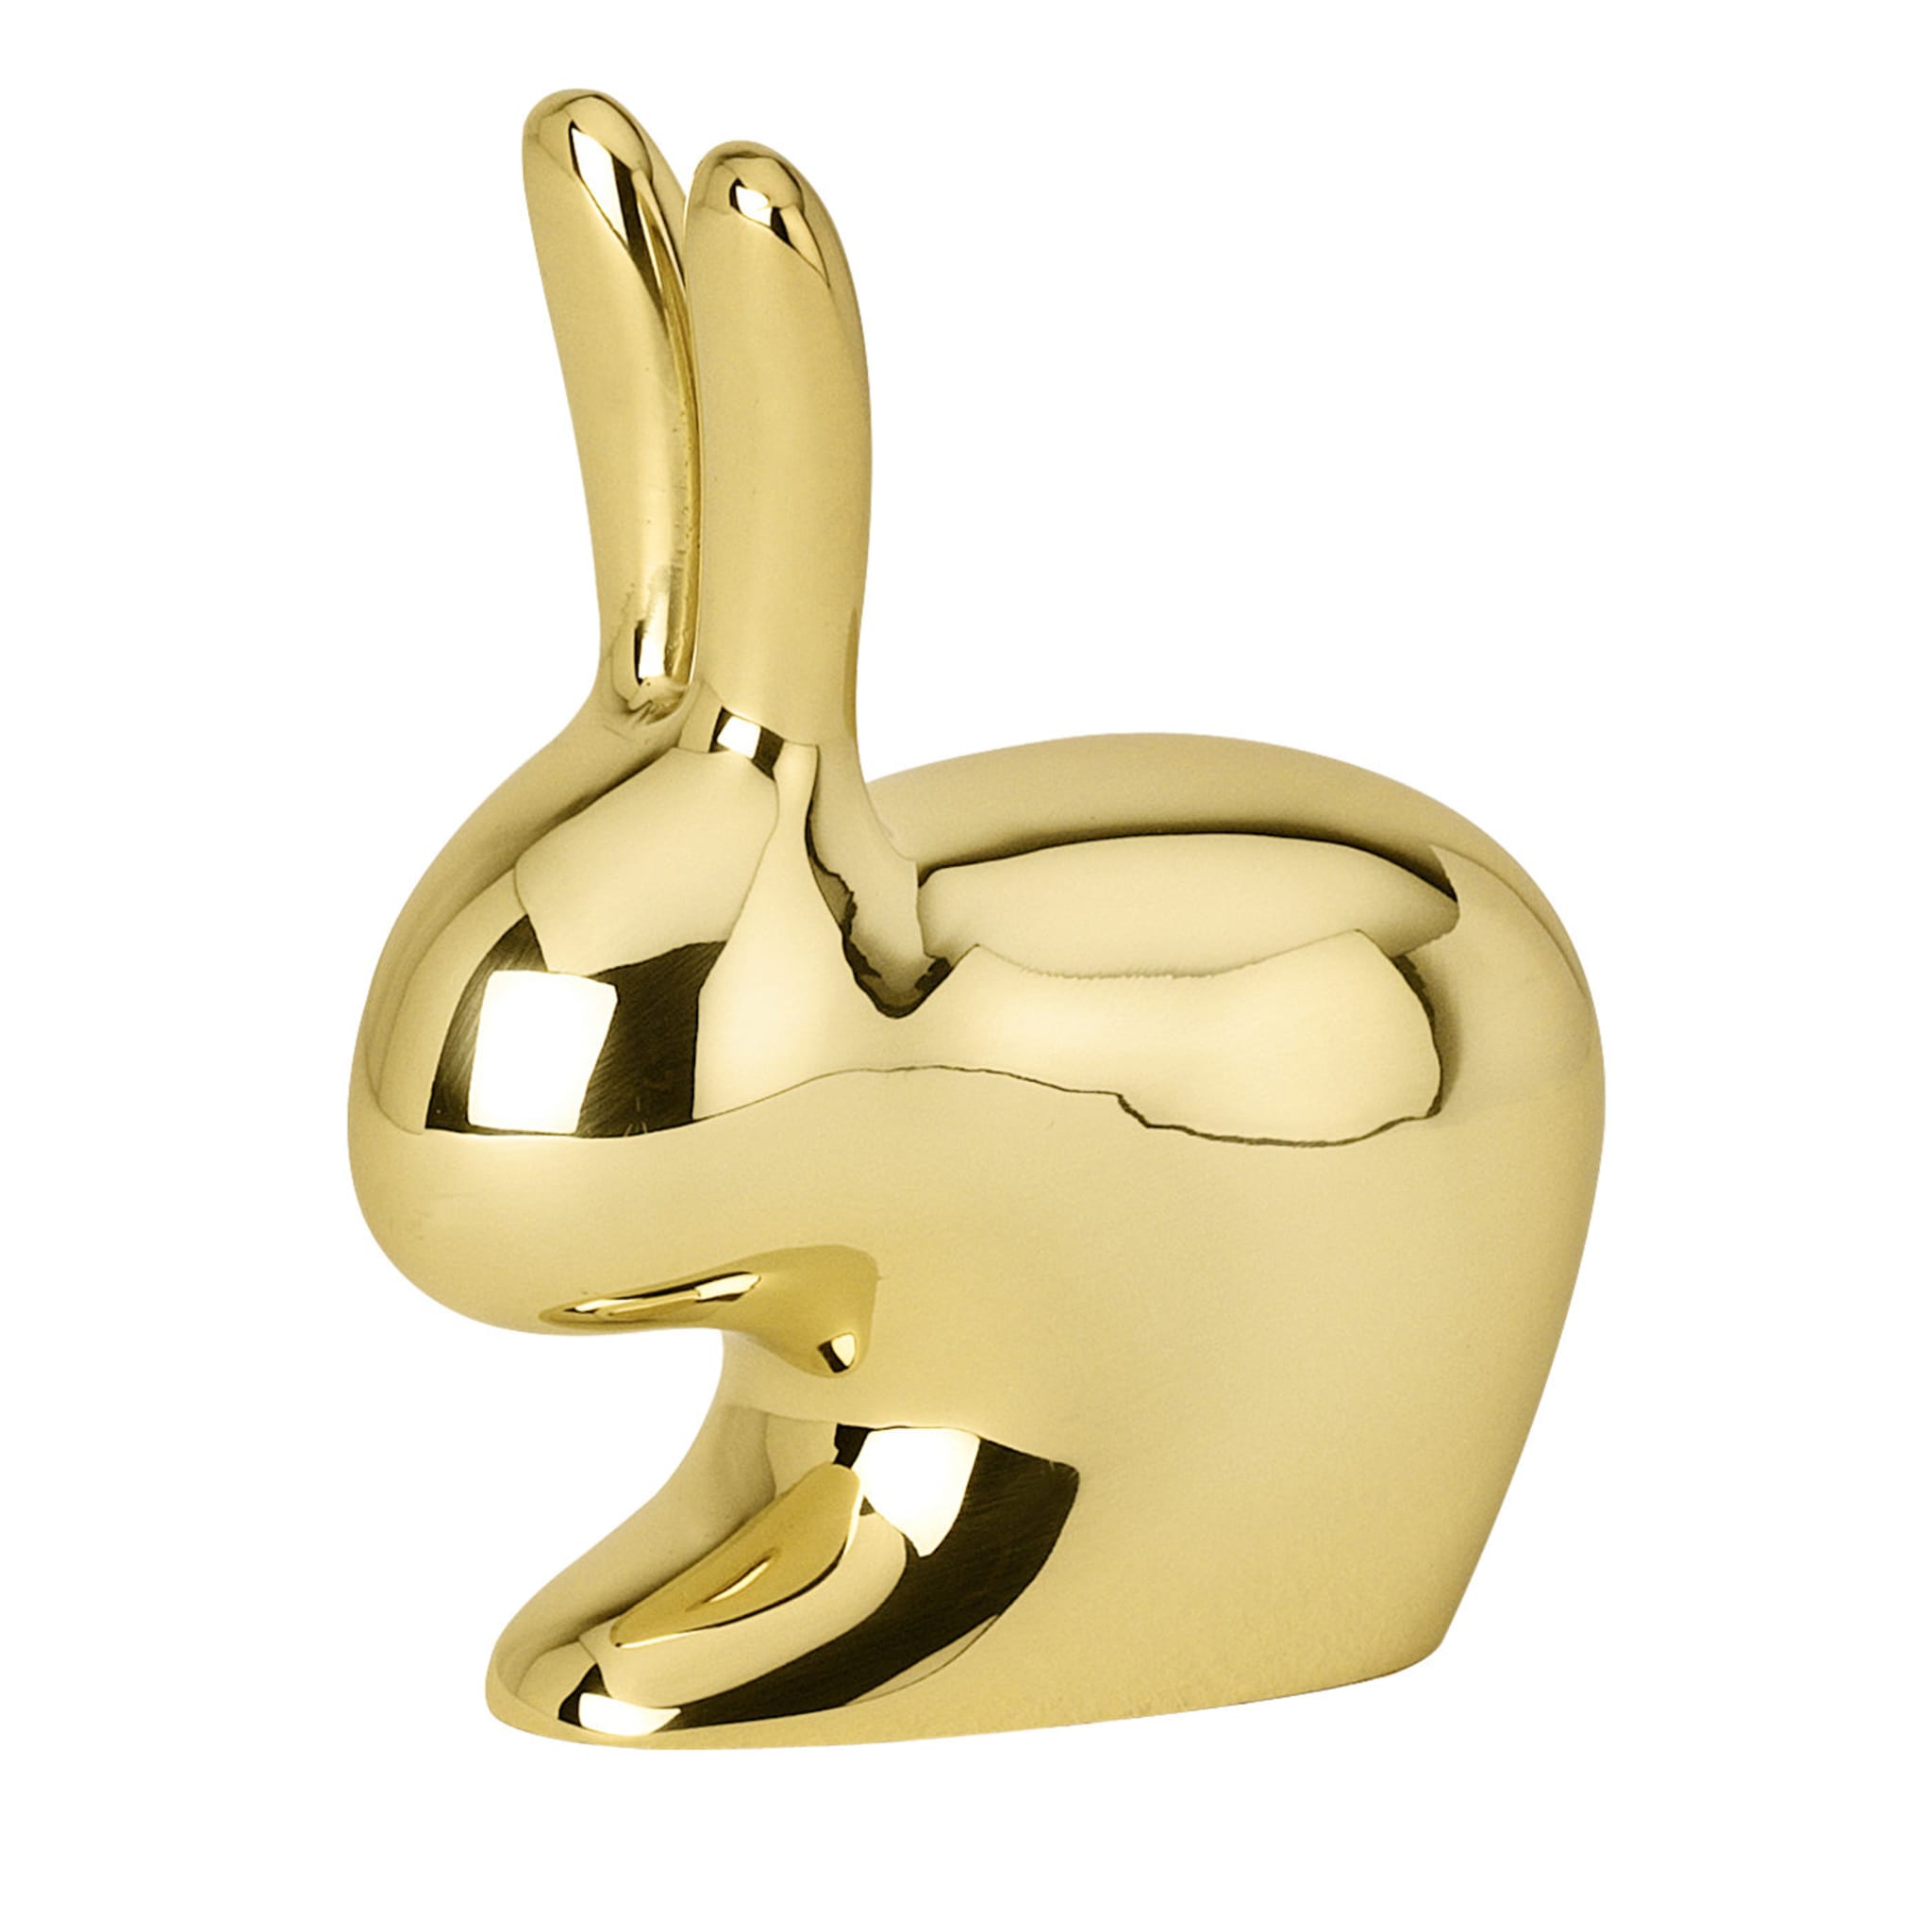 Rabbit Doorstop in Polished Brass by Stefano Giovannoni - Alternative view 2